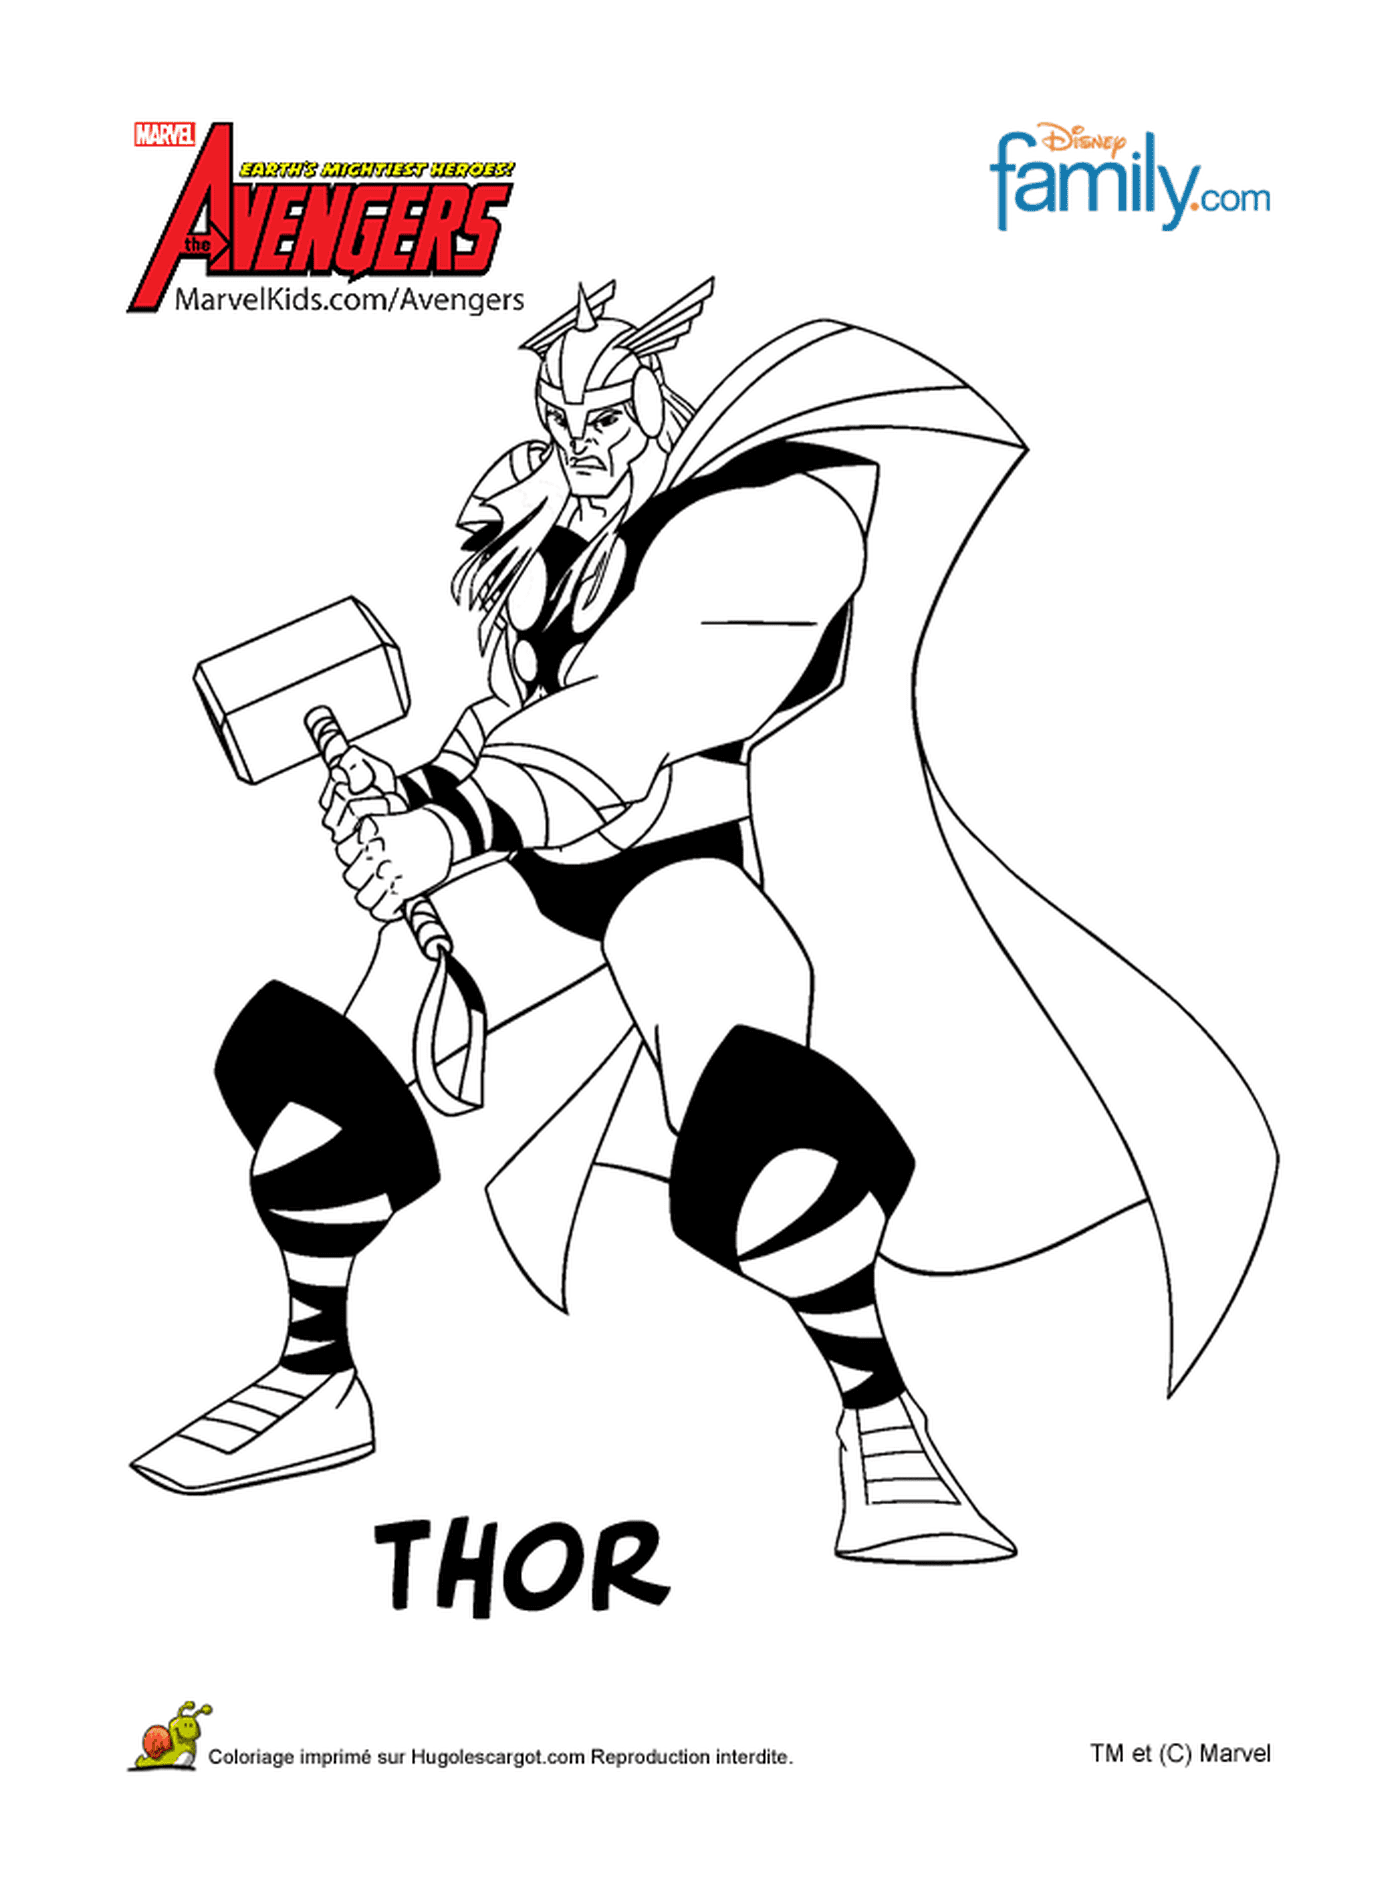  Thor holding a hammer 